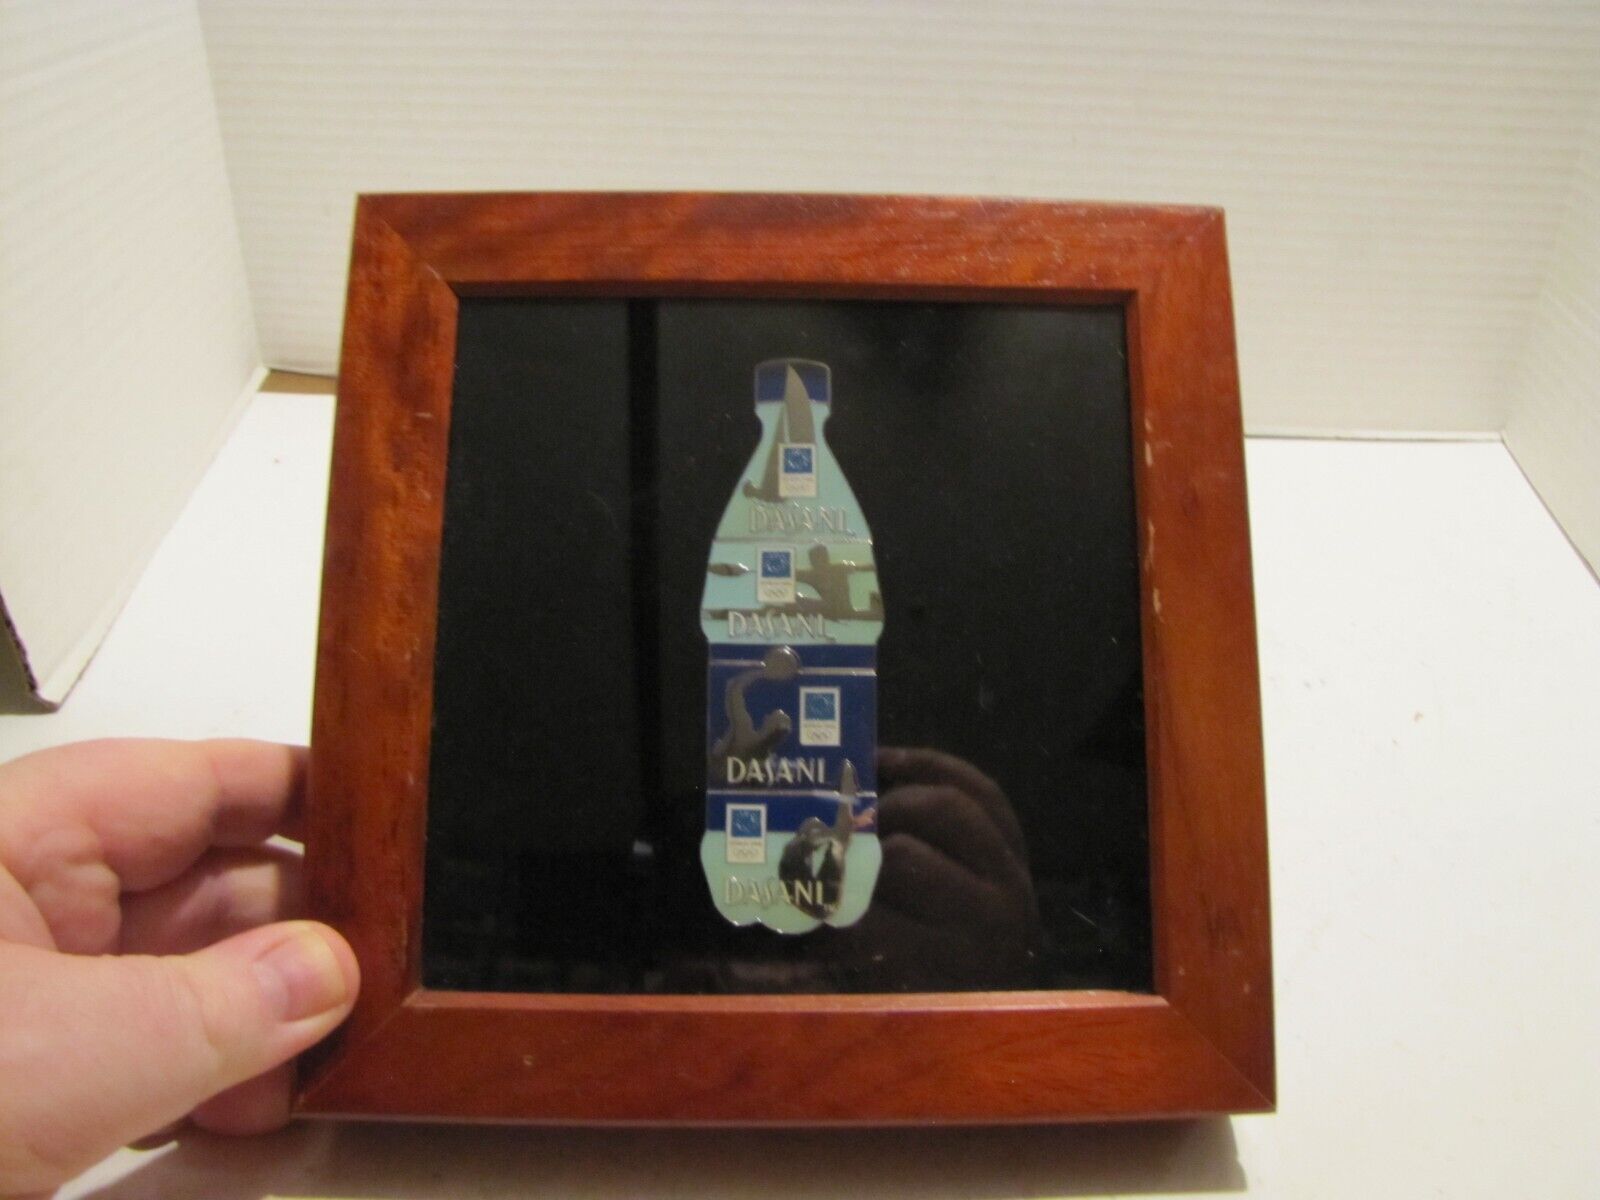 ATHENS OLYMPICS DASANI WATER COCA COLA 4 PIN BOTTLE PUZZLE ATHLETES IN WOOD BOX